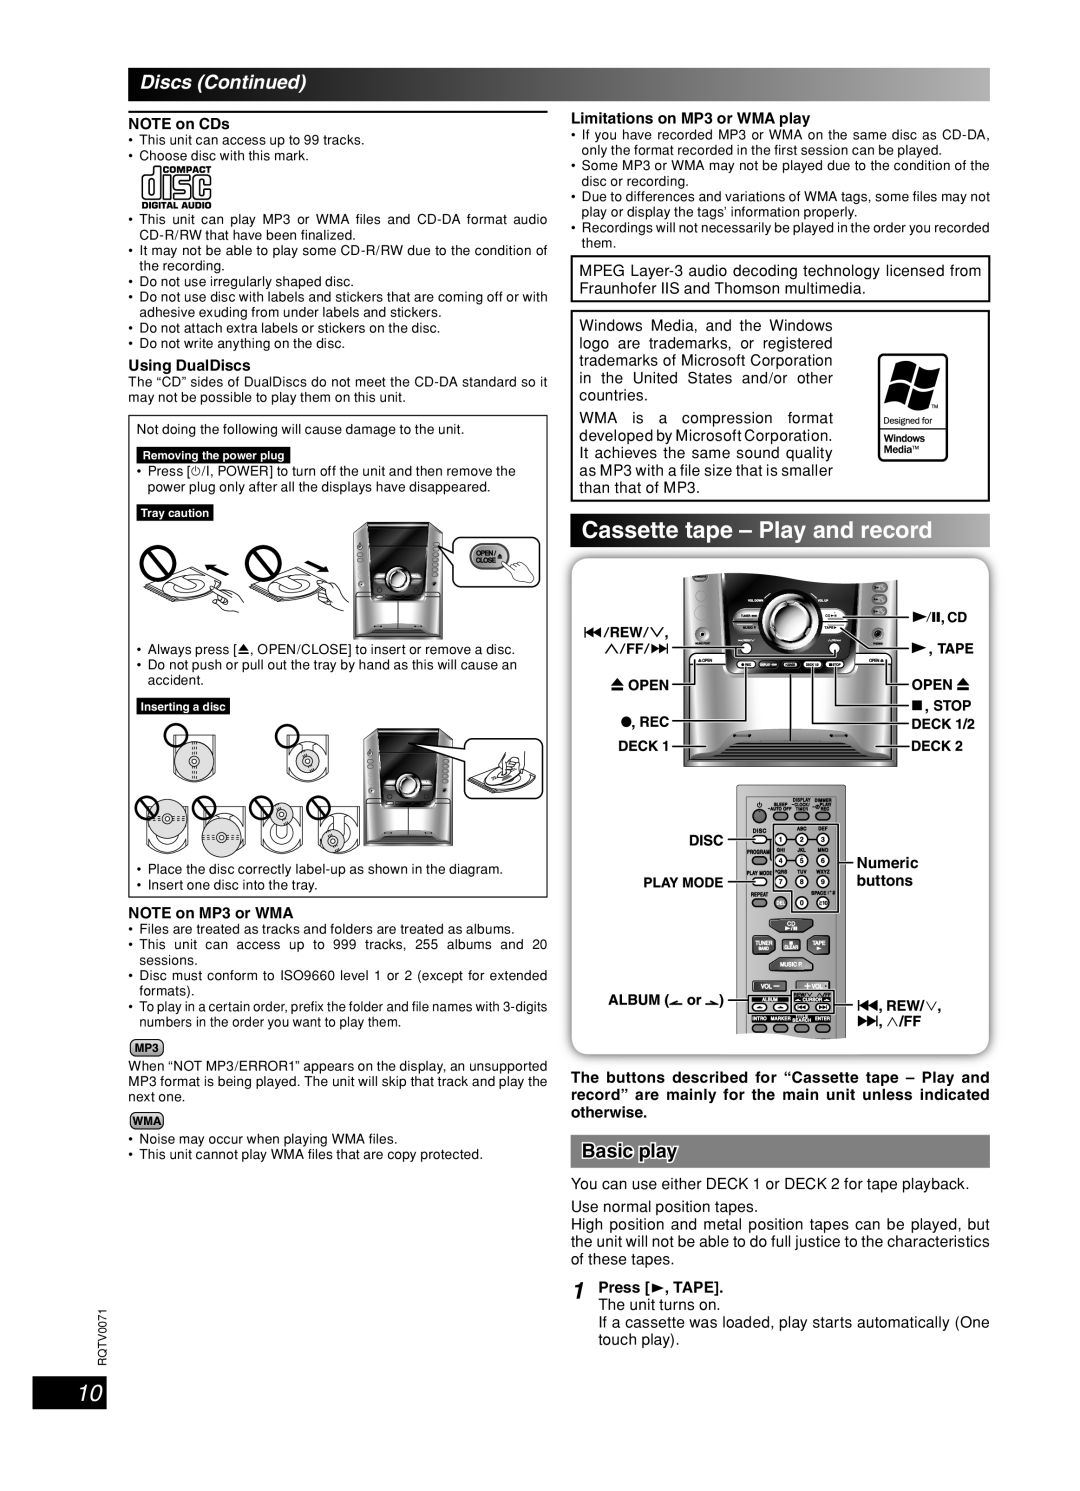 Panasonic SC-AK640 Cassette tape - Play and record, Discs Continued, English, NOTE on CDs, Using DualDiscs, Numeric 